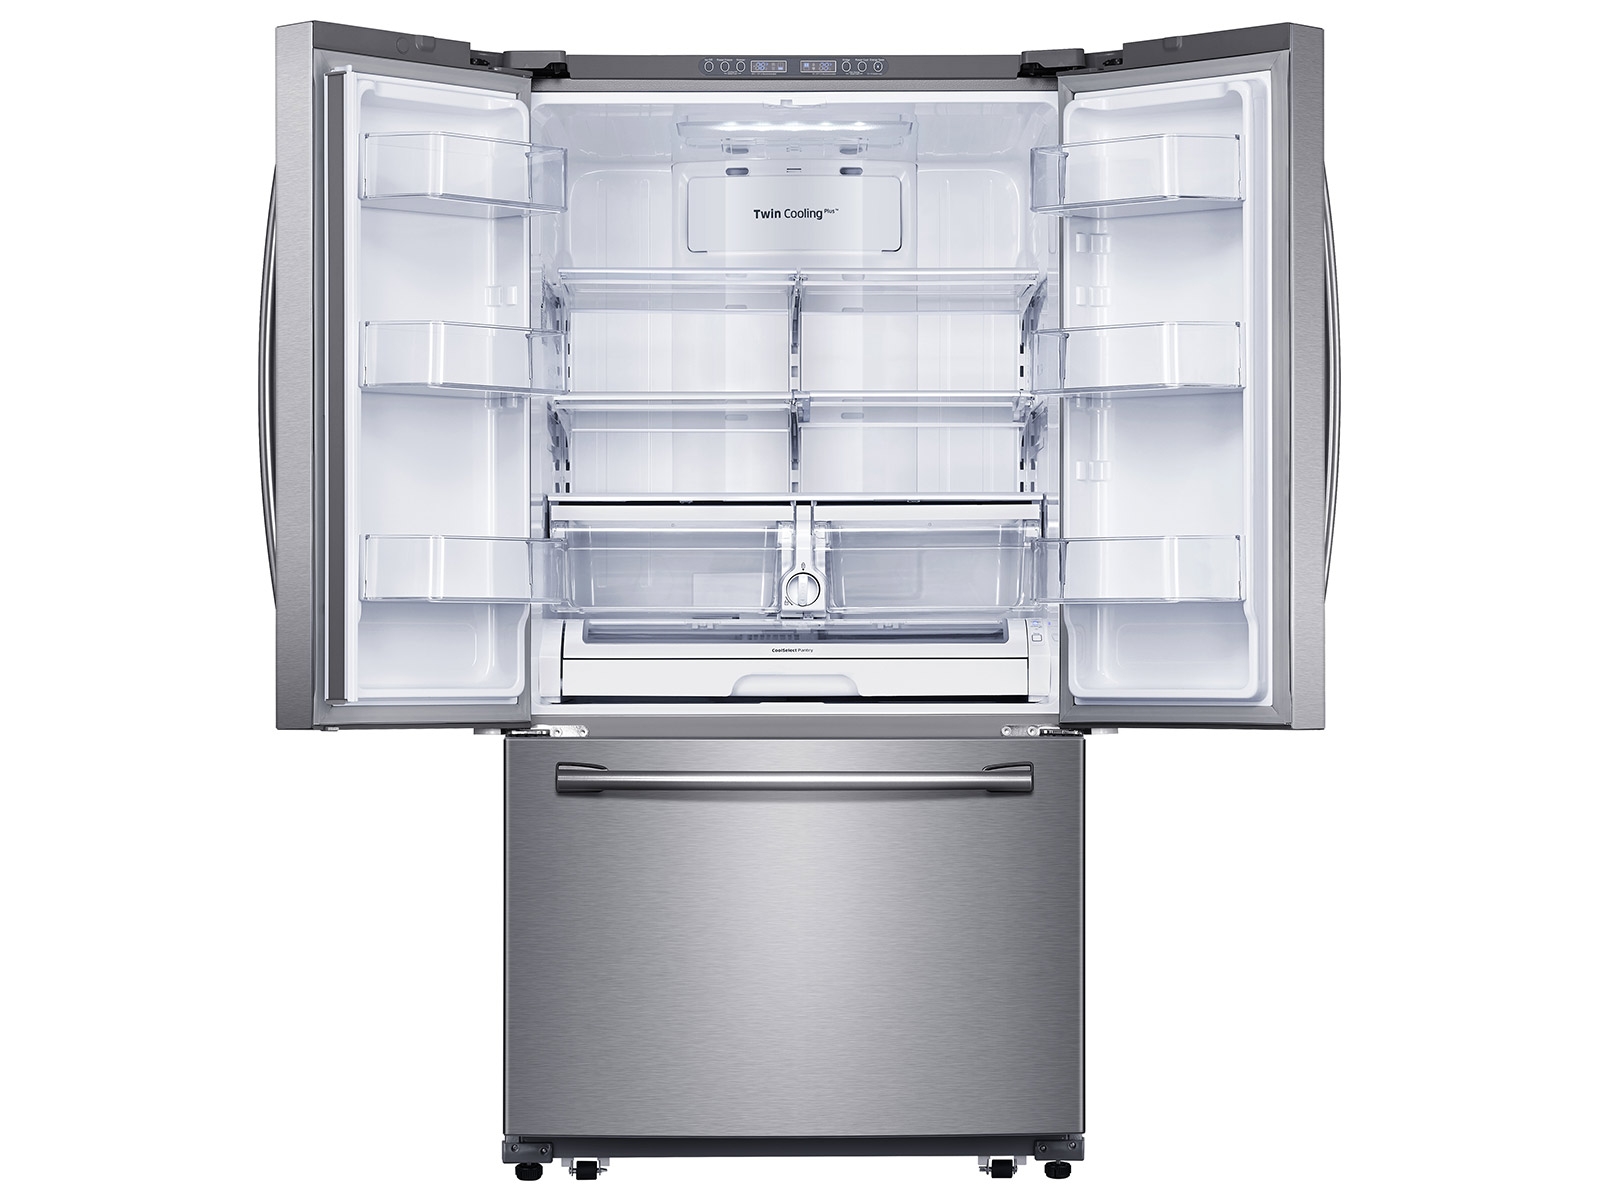 https://image-us.samsung.com/SamsungUS/home/home-appliances/refrigerators/all/pdp/rf260beaes/02_Refrigerator_French-Door_RF260BEAESR_Front_Top_Doors_Open_Empty_Silver.jpg?$product-details-jpg$